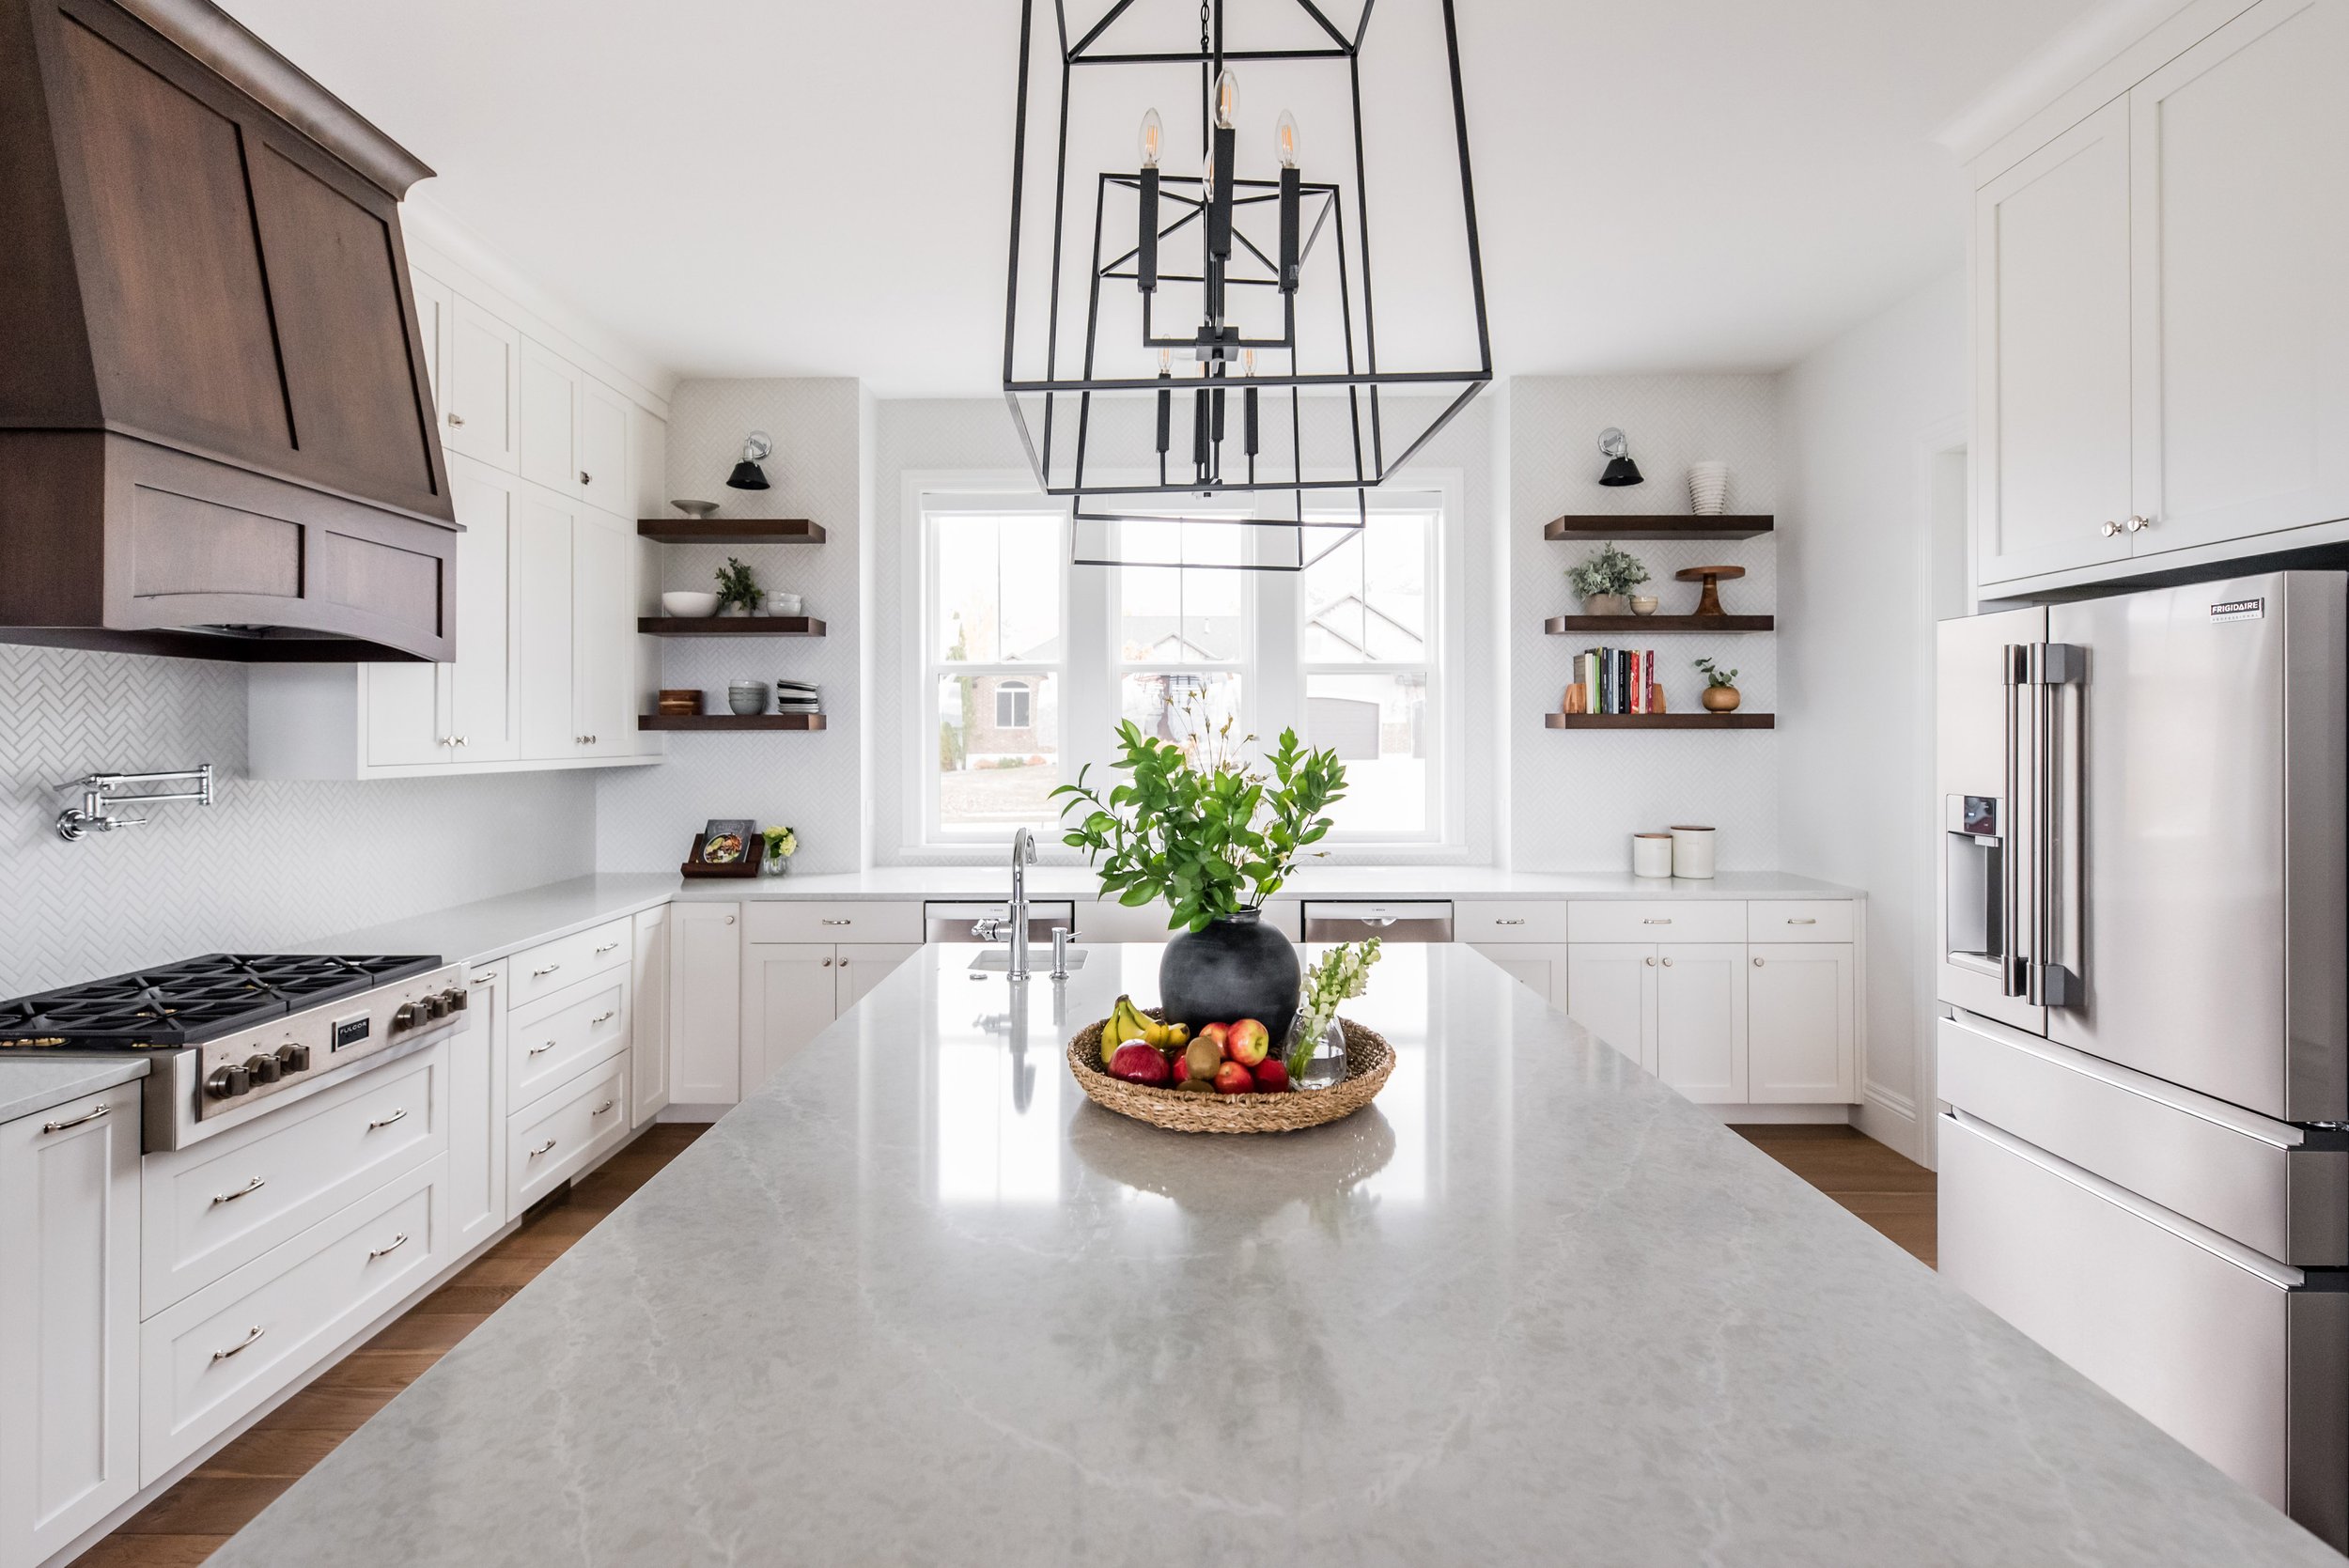  Liz Powell Design gives tips about how to pick out cabinet colors for a kitchen with an accent wood hood. Cache Interior Designers plan out my new build kitchen #LizPowellDesign #InteriorDesignUtah #InteriorDesigner #buildingahome #cabinetry #dreamh